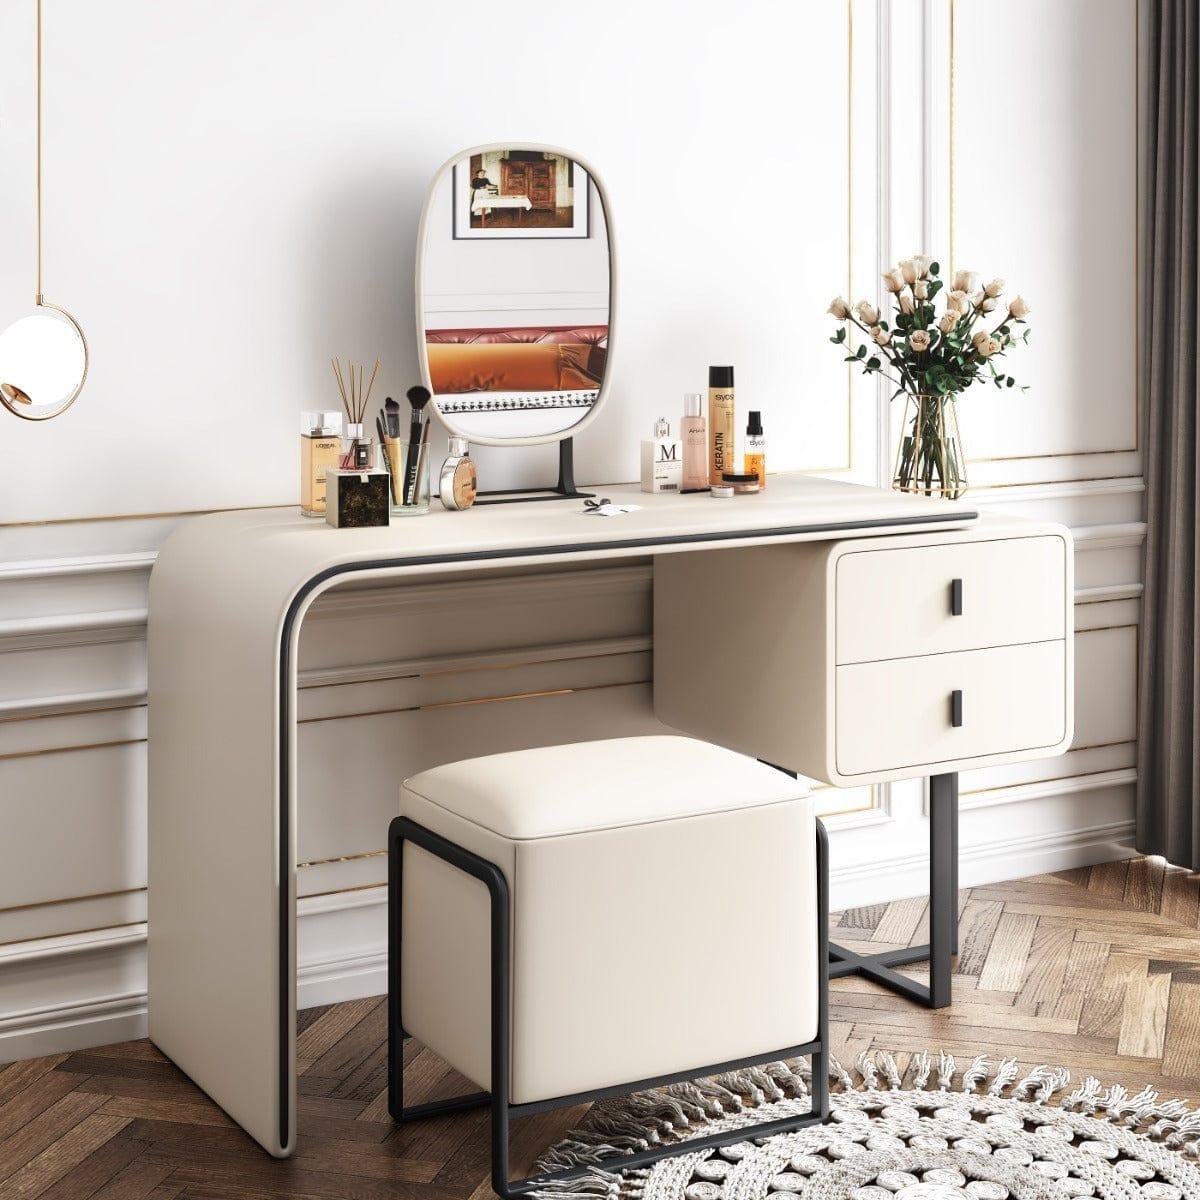 Shop Modern Extendable Makeup Vanity Table with PU Leather, 2 Solid Wood Drawers, Side Cabinet, HD Mirror & Upholstered Stool Included, Mademoiselle Home Decor